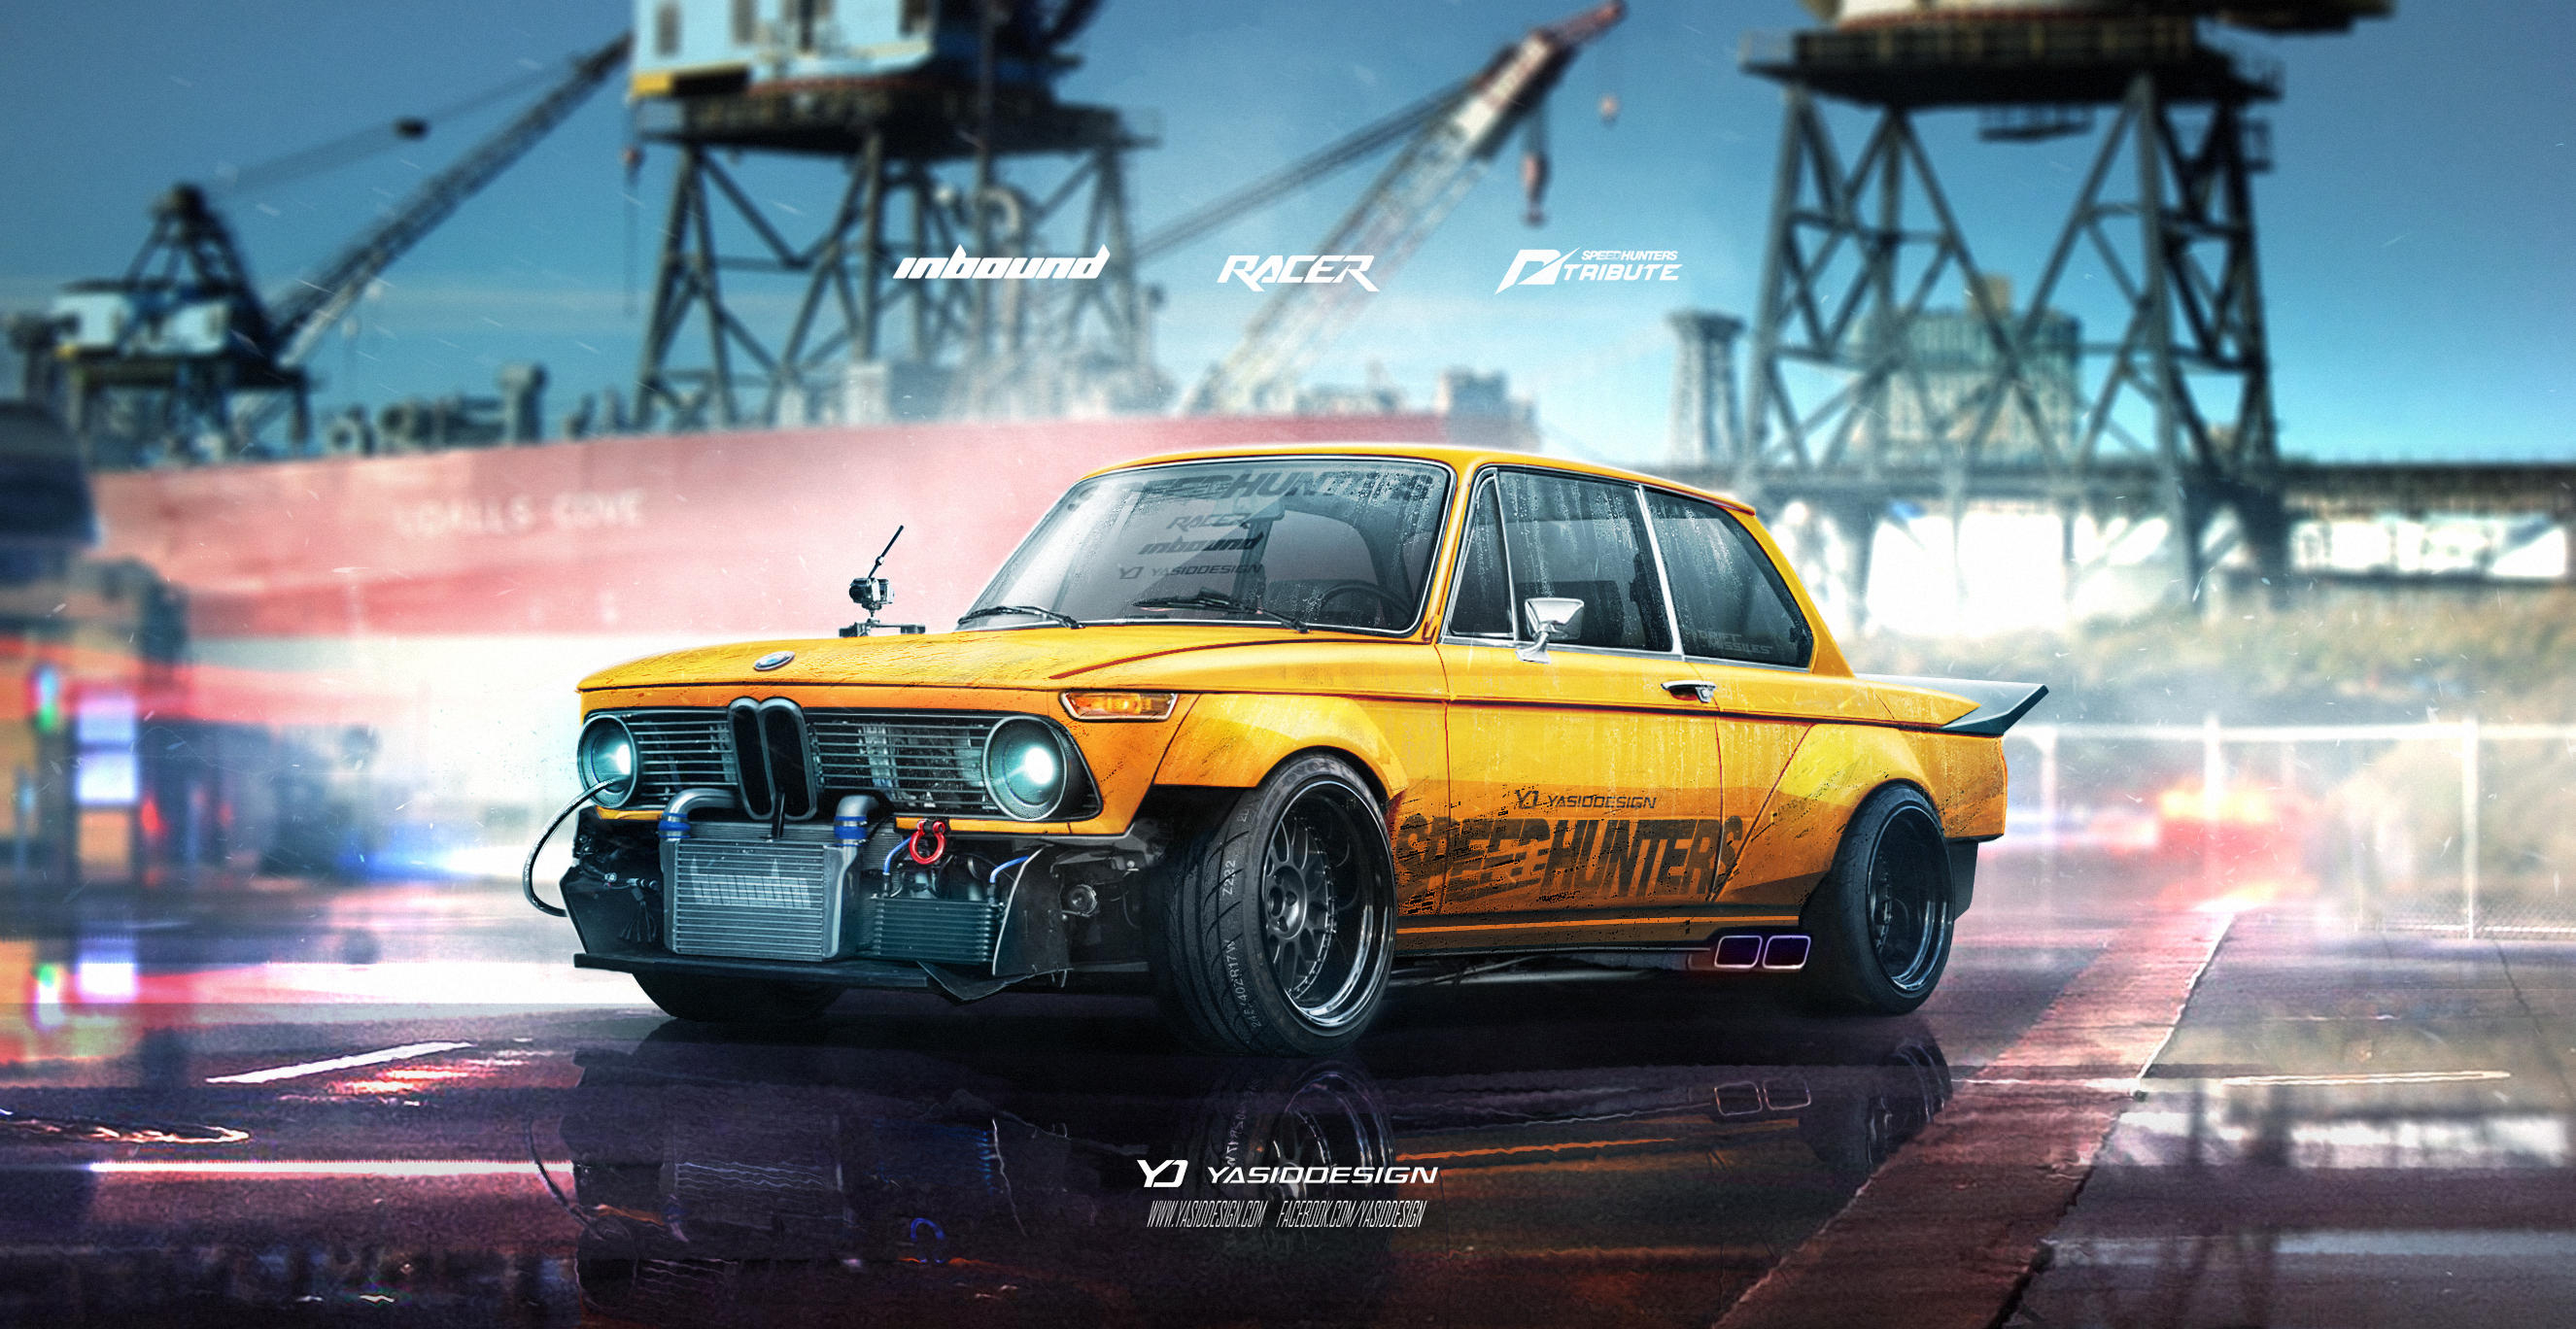 Bmw 2002 Wallpapers